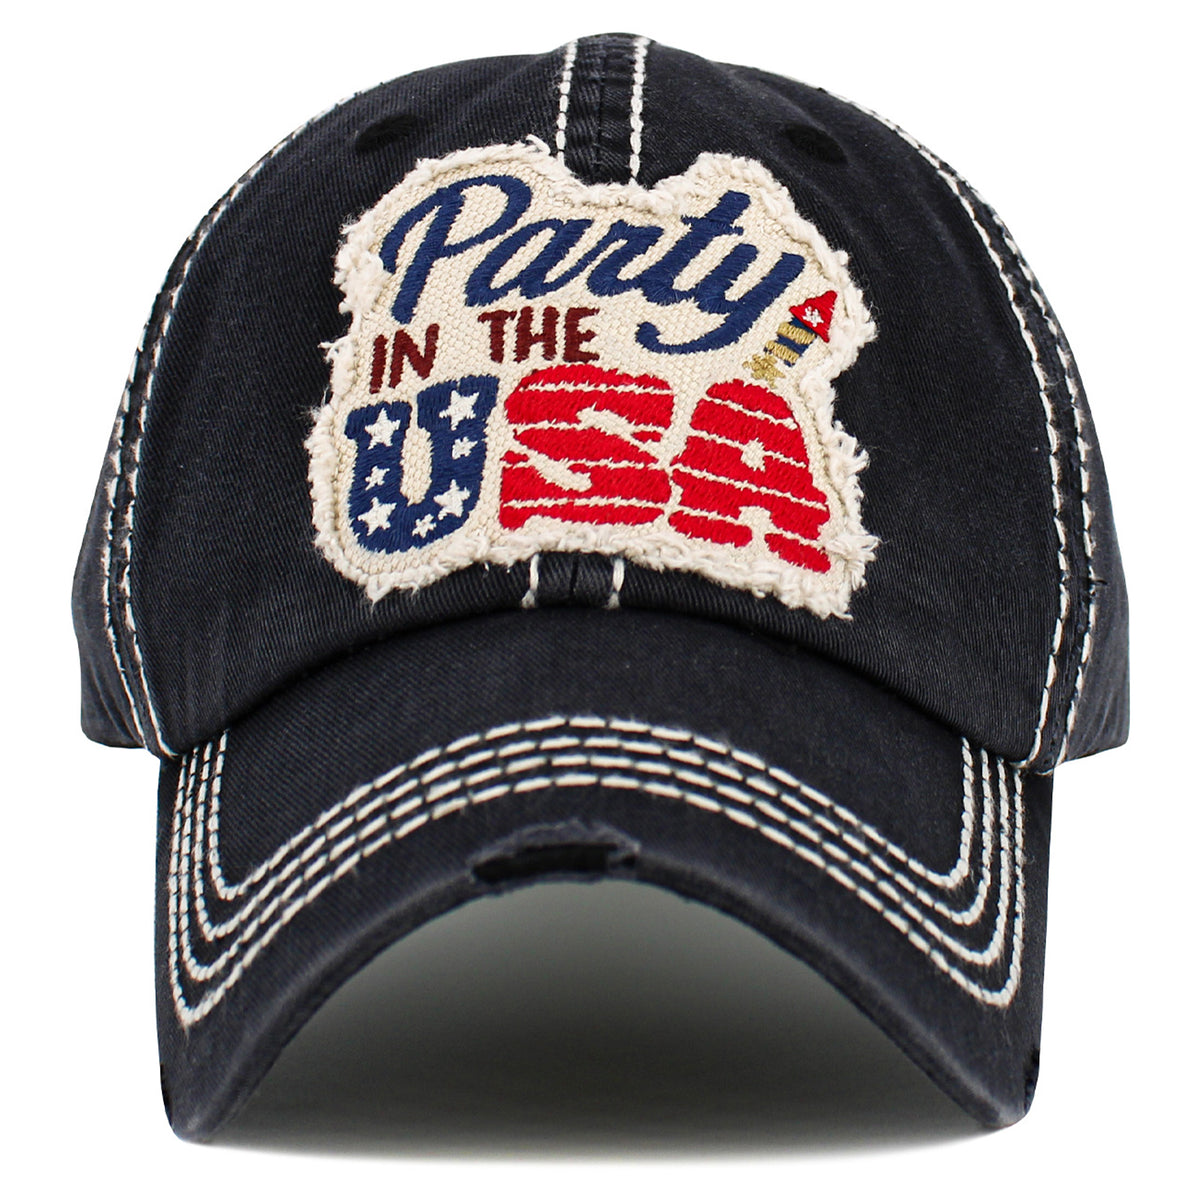 1588 - Party in The USA Hat - Black